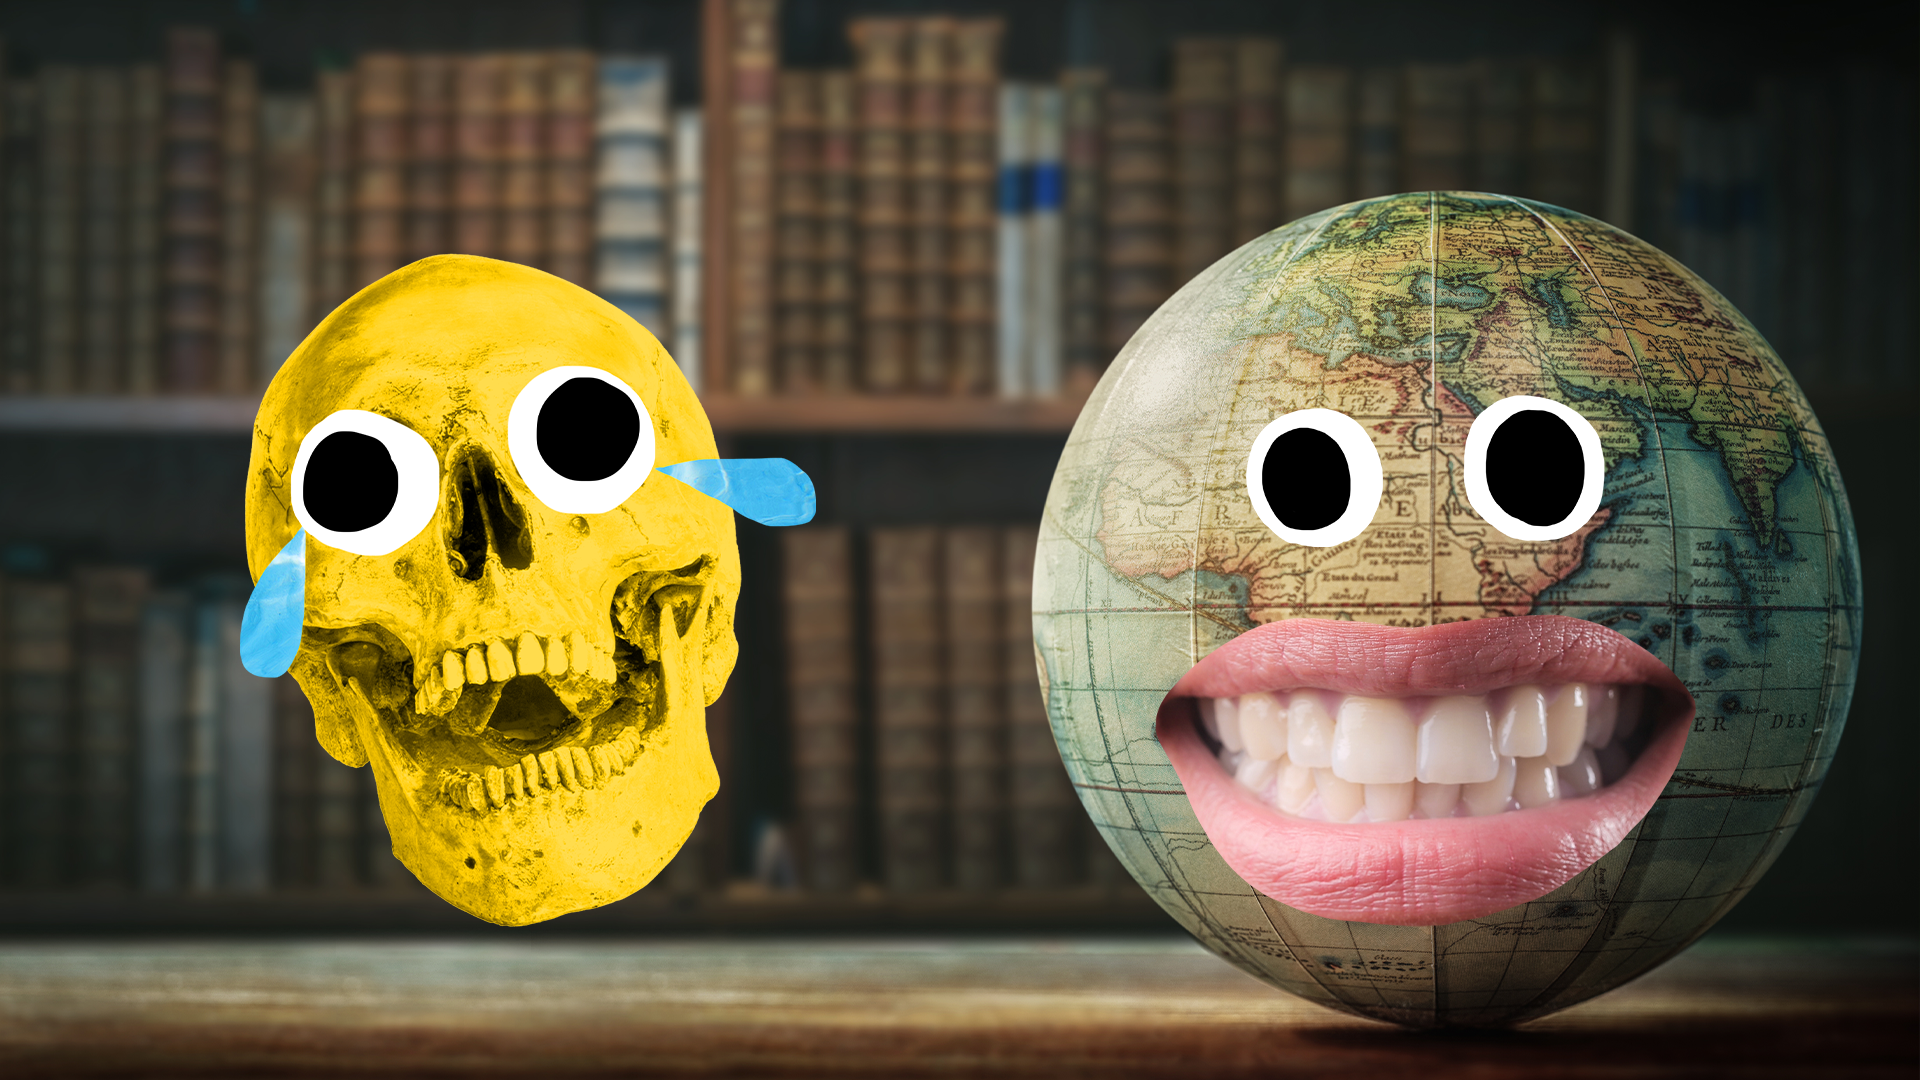 Beano skull, books and globe with face